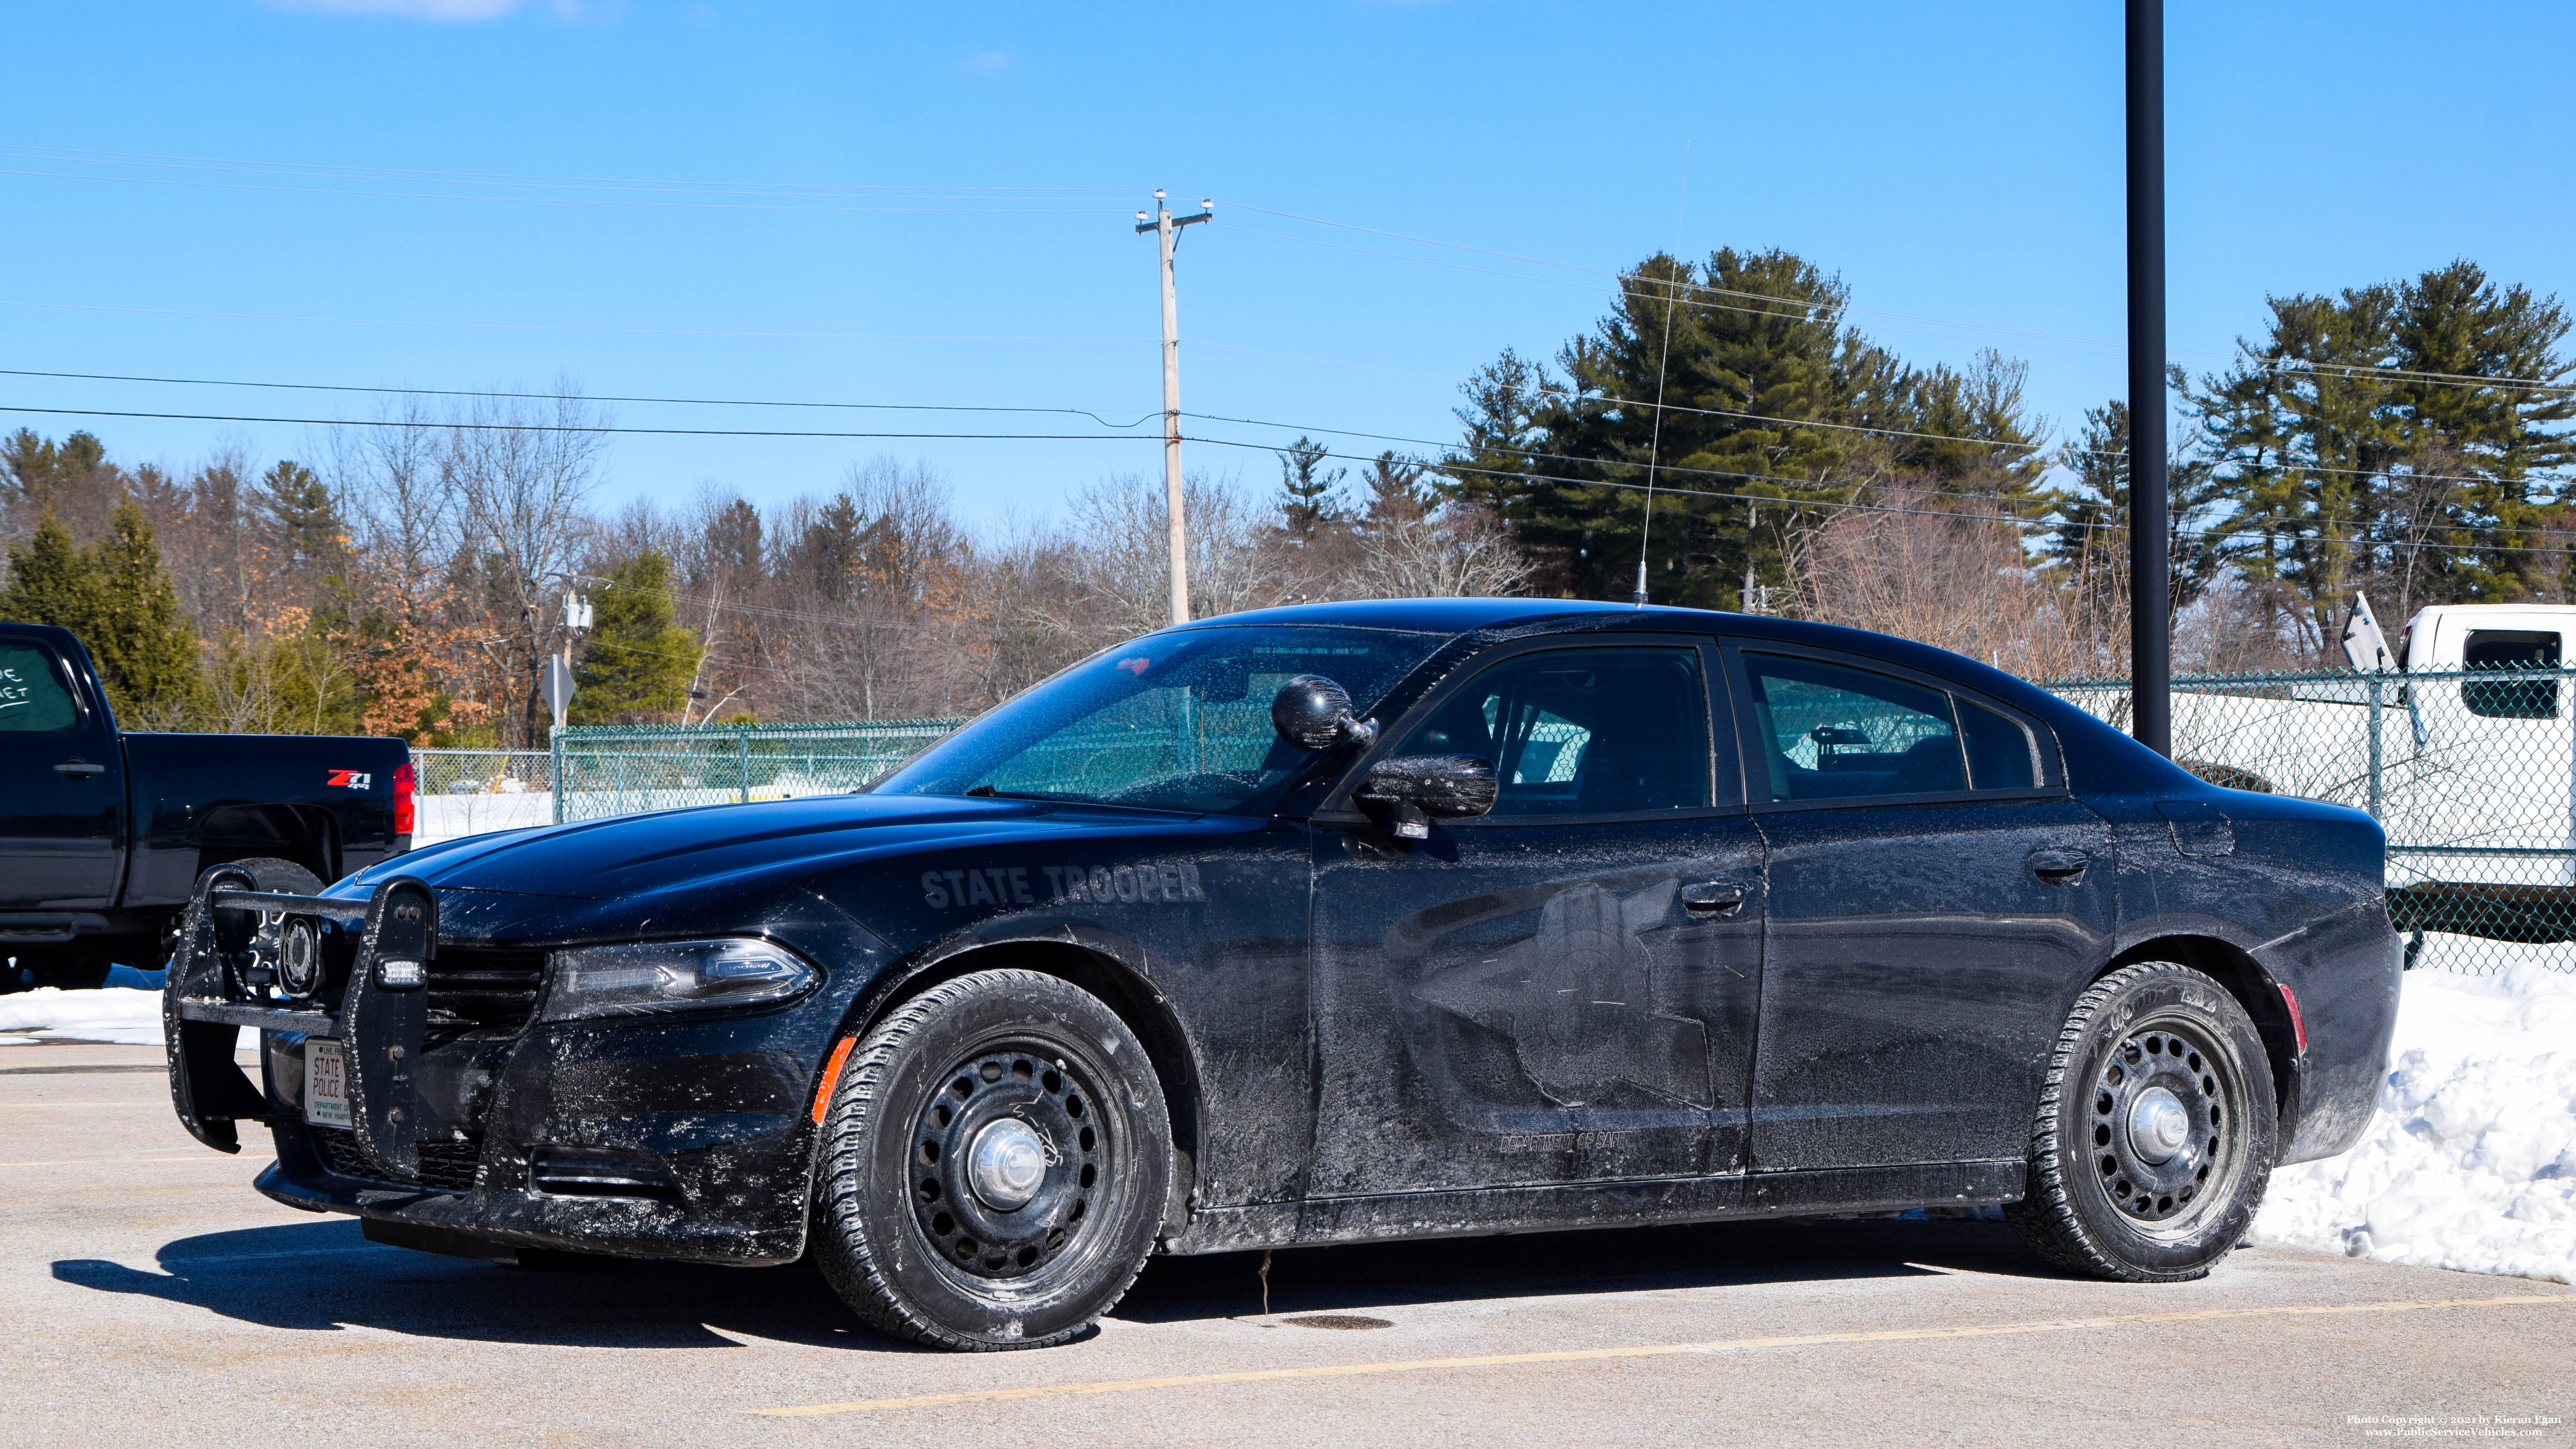 A photo  of New Hampshire State Police
            Cruiser 210, a 2015-2019 Dodge Charger             taken by Kieran Egan